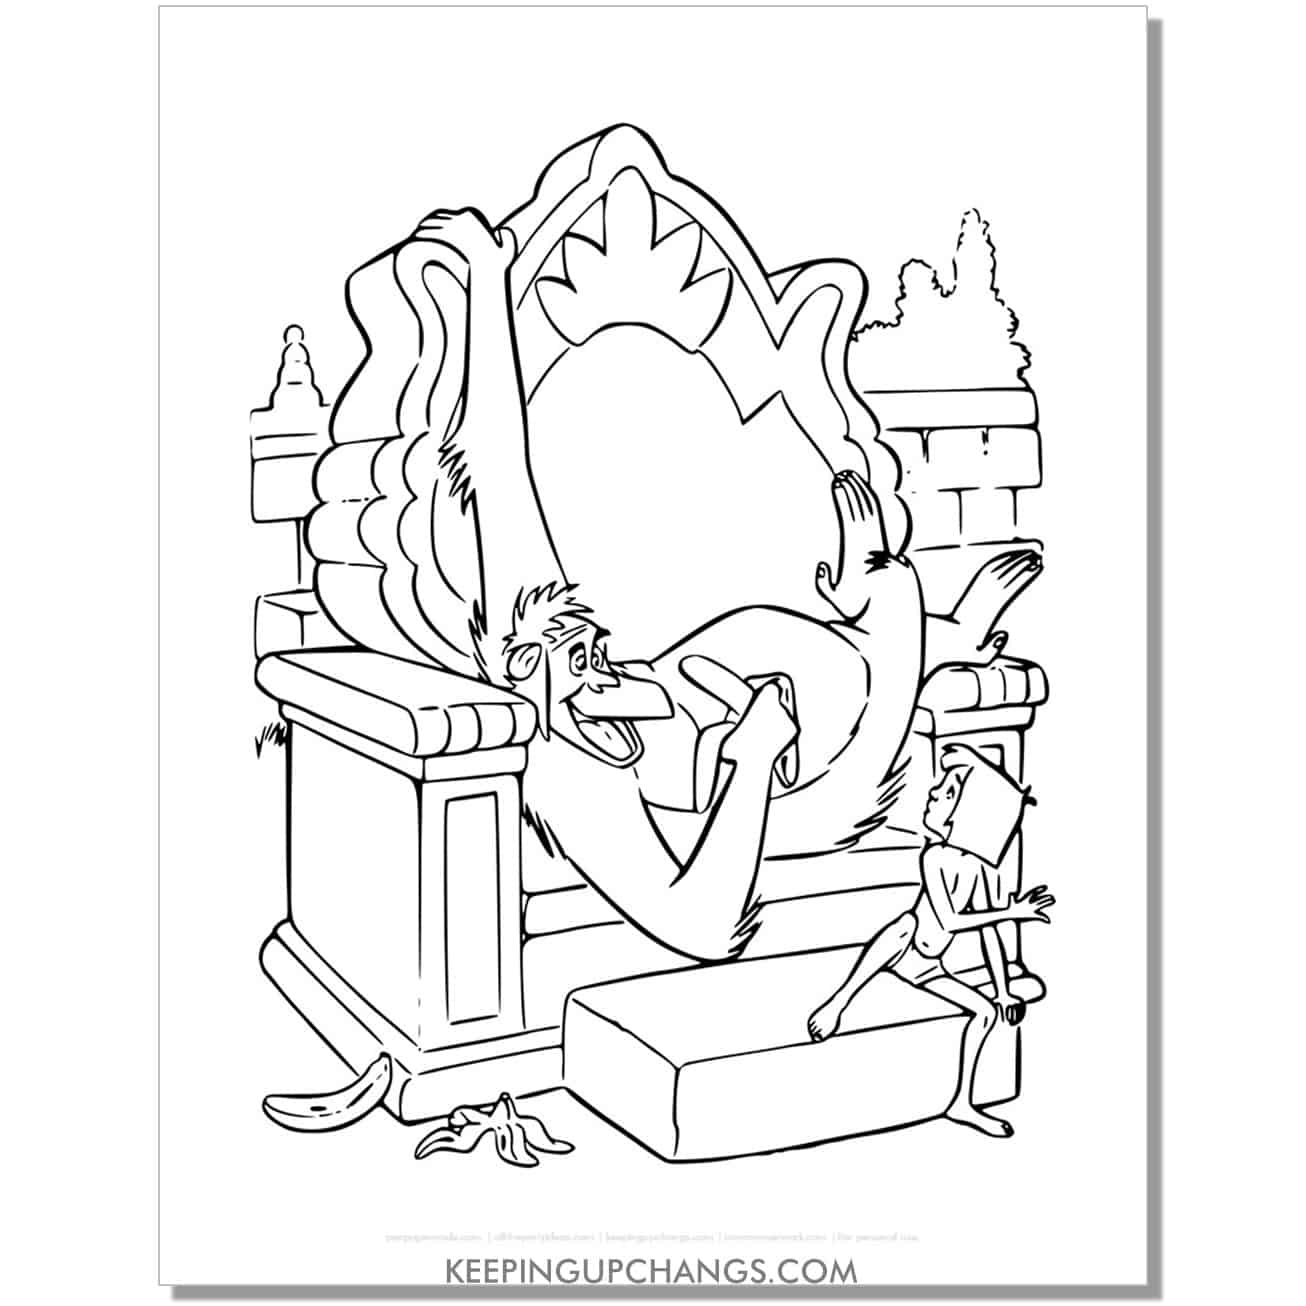 king louie sleepig on temple throne jungle book coloring page, sheet.